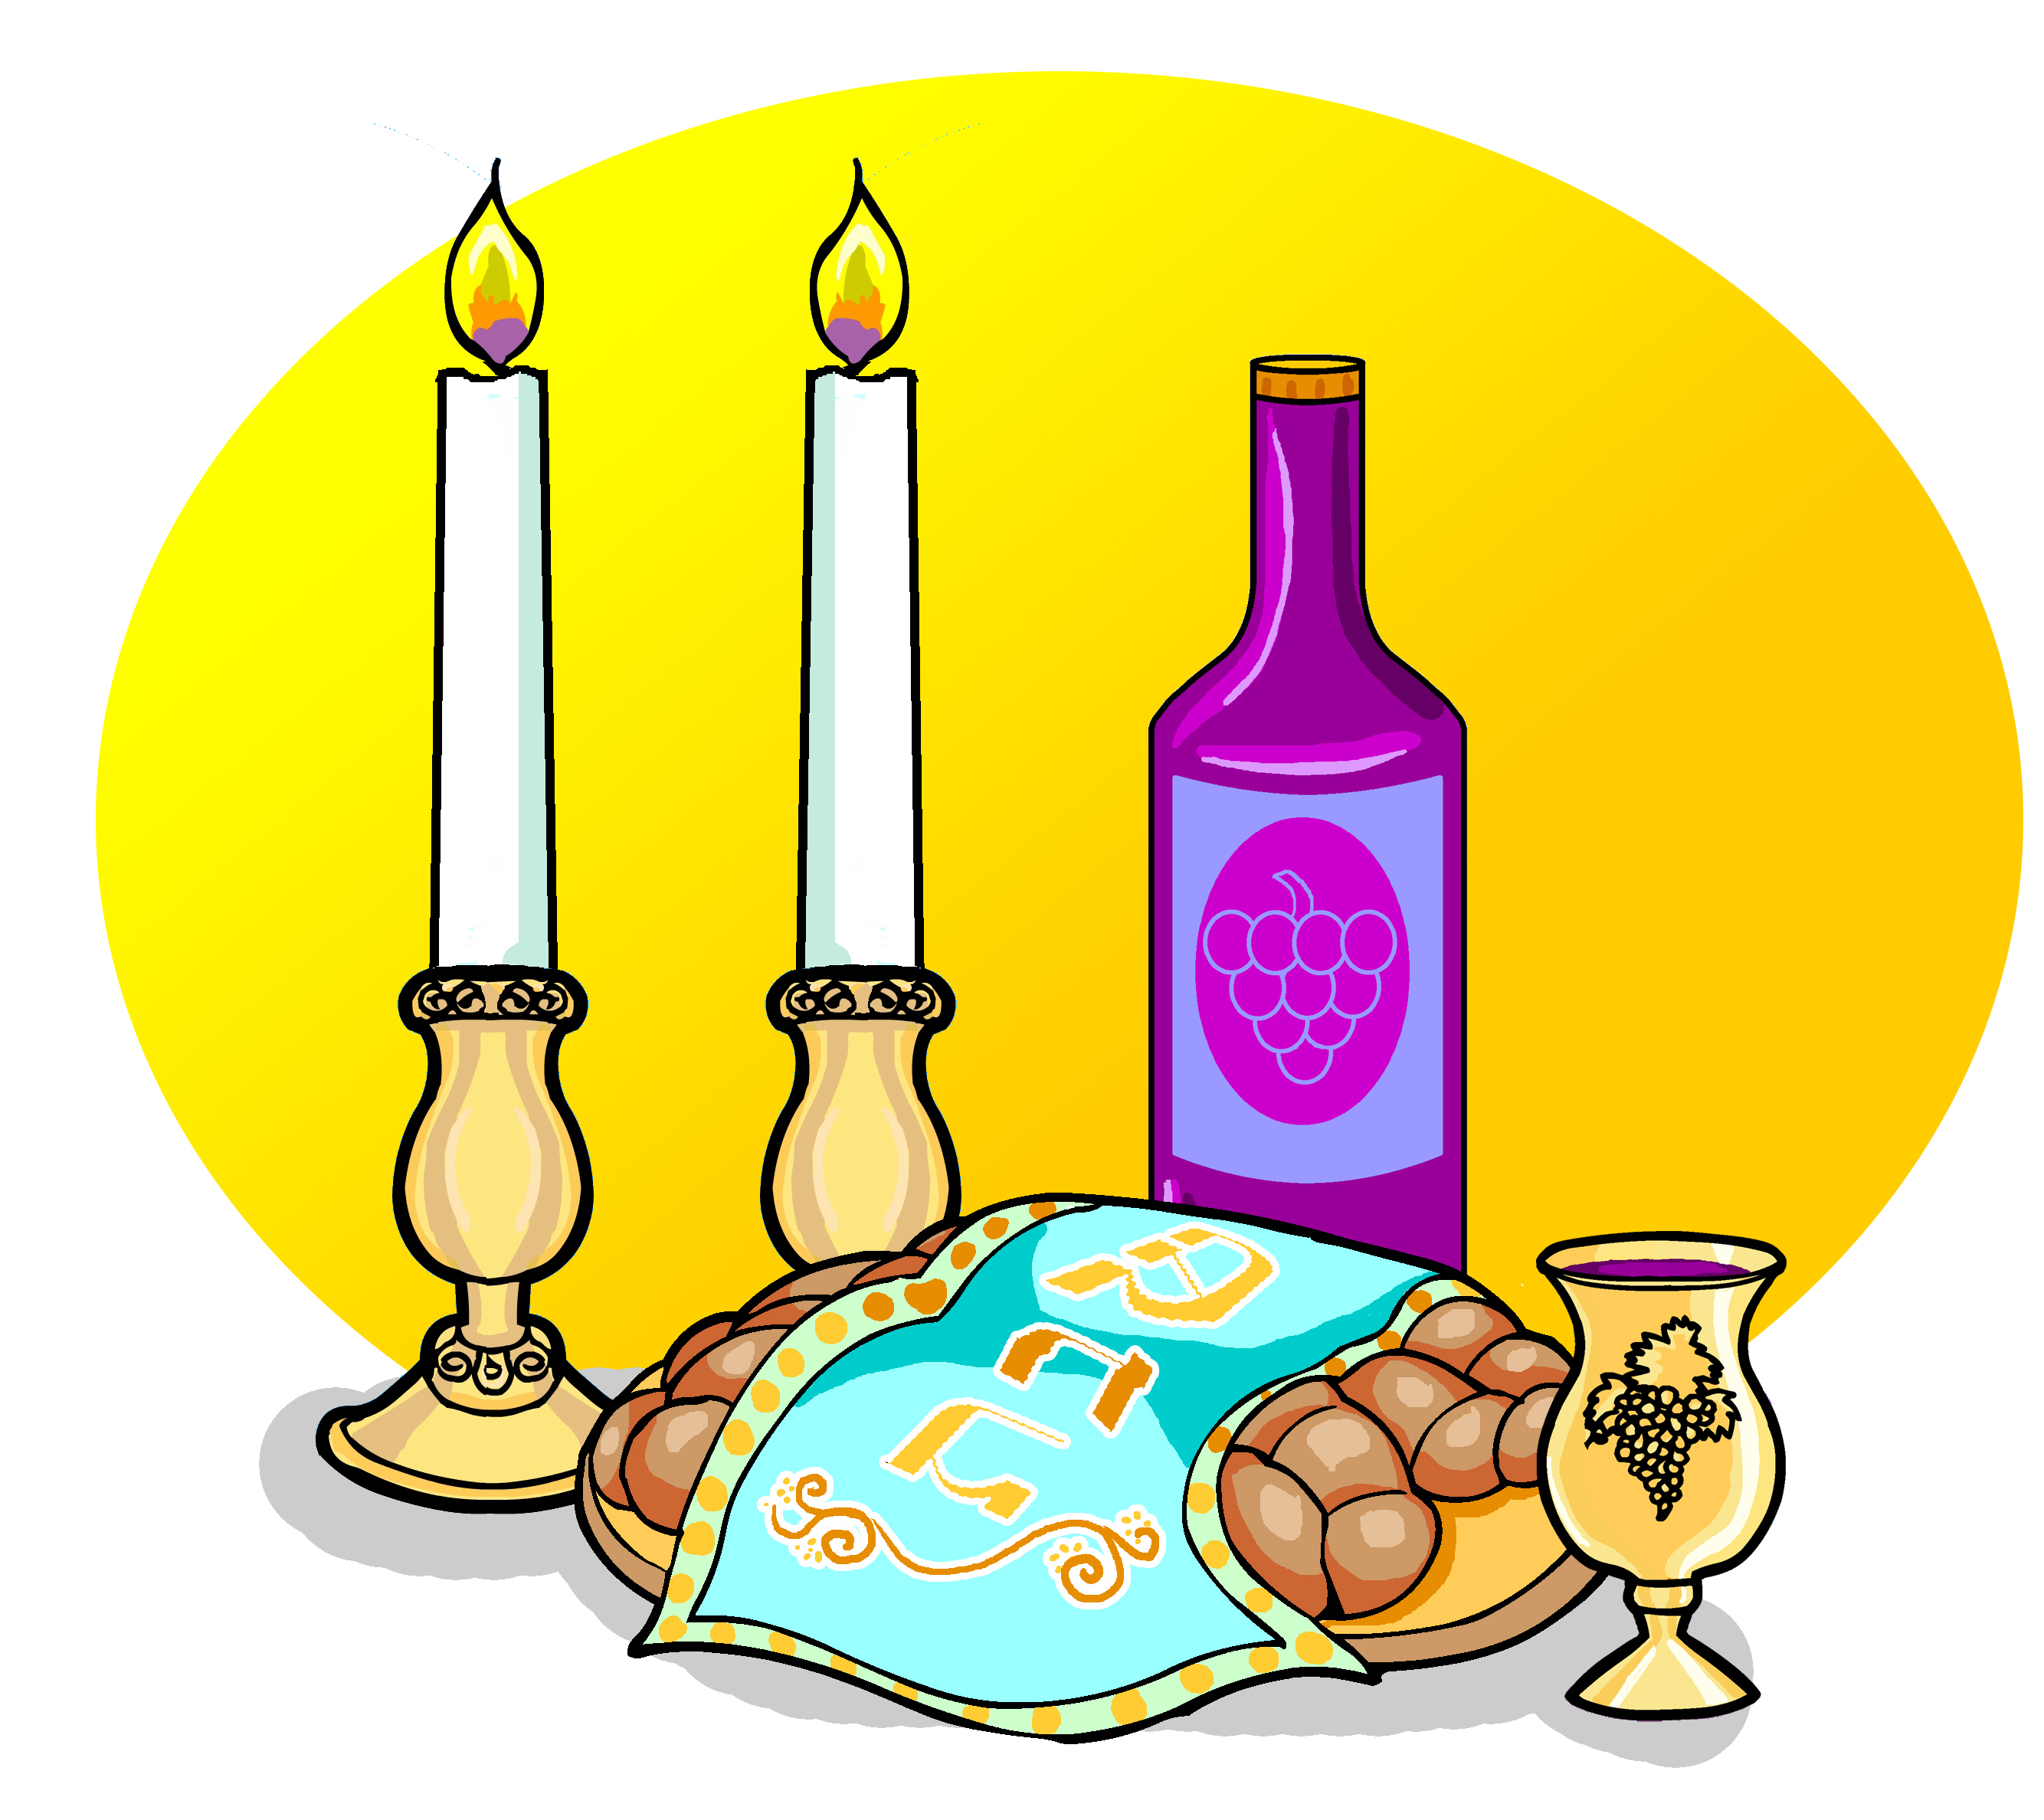 Shabbat challah, candles, wine, and kiddush cup